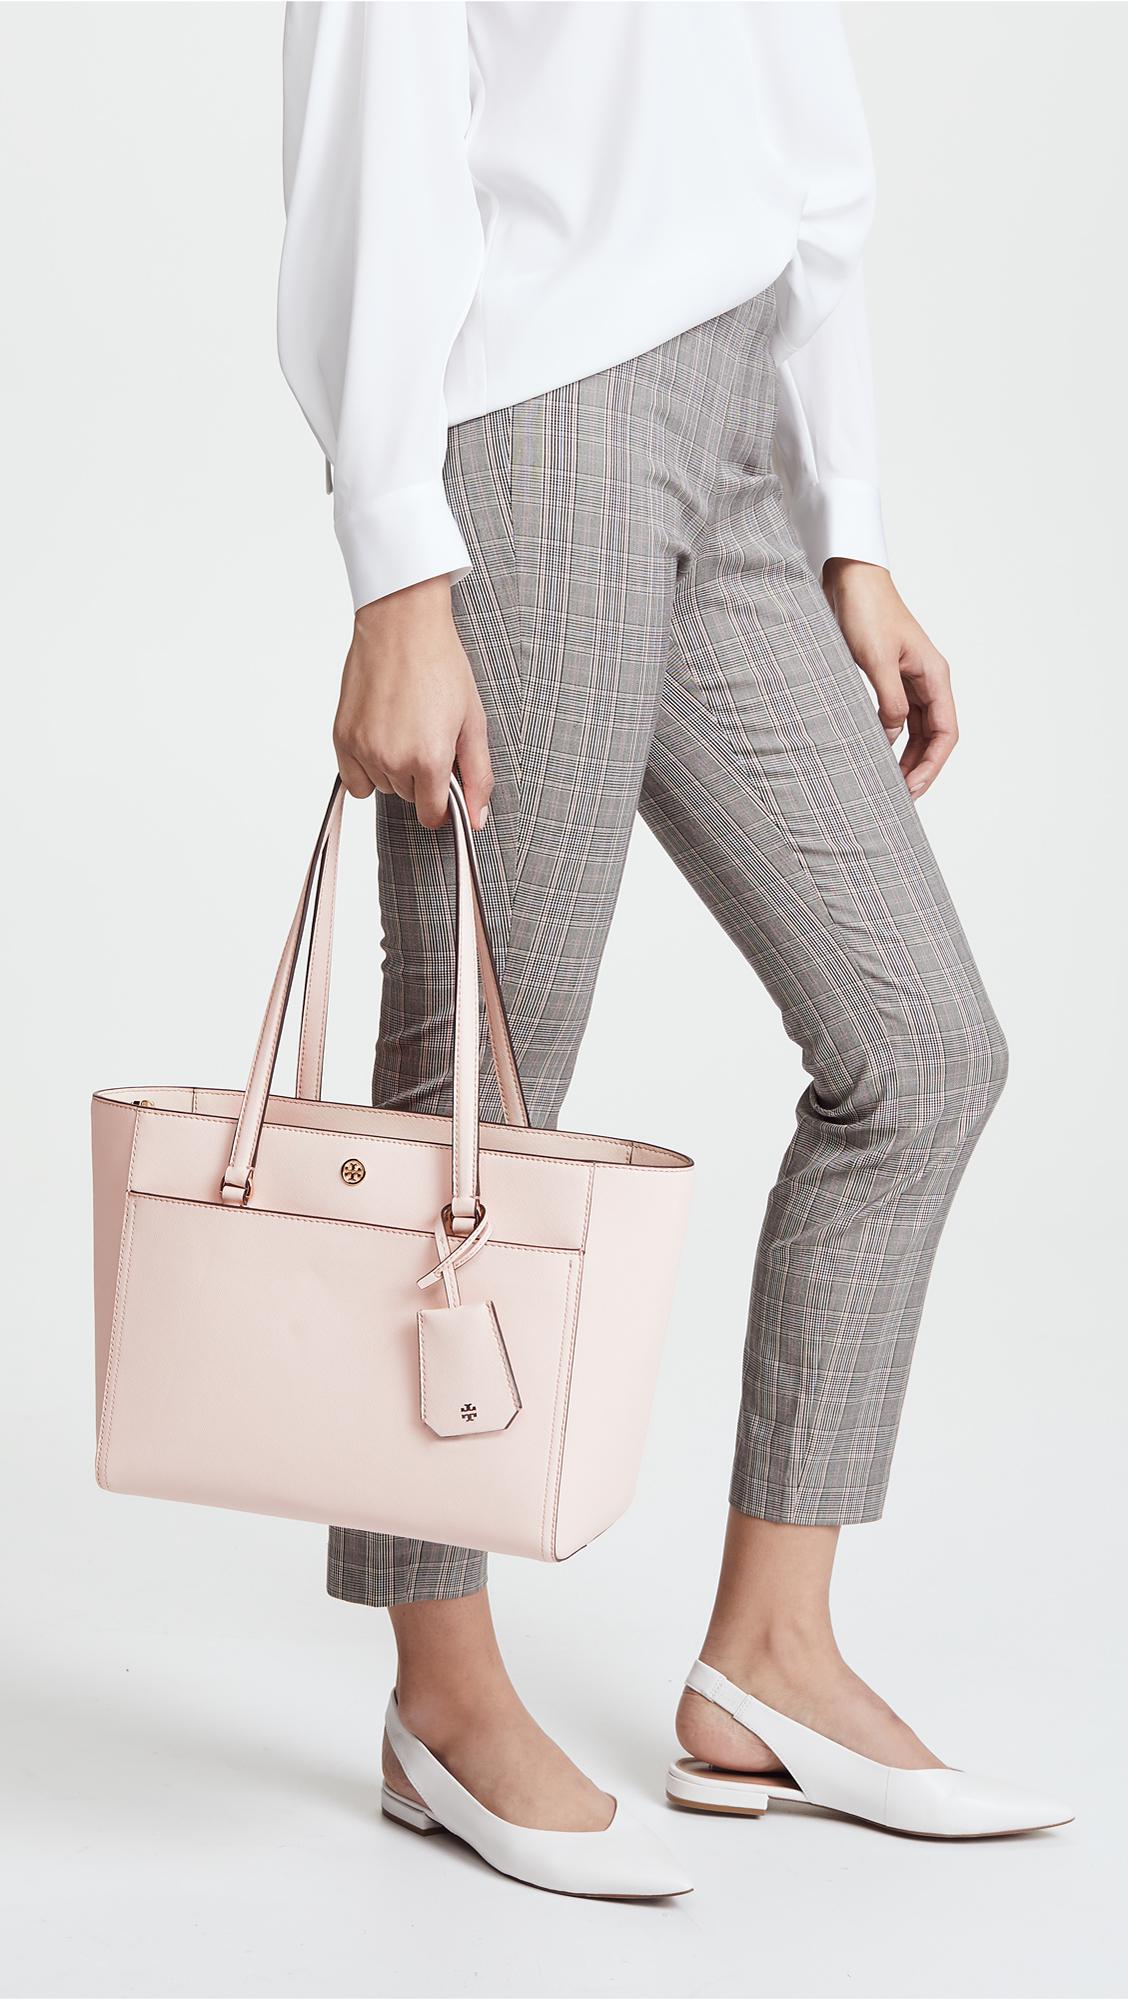 Tory Burch Small Robinson Perforated Tote Bag - Farfetch